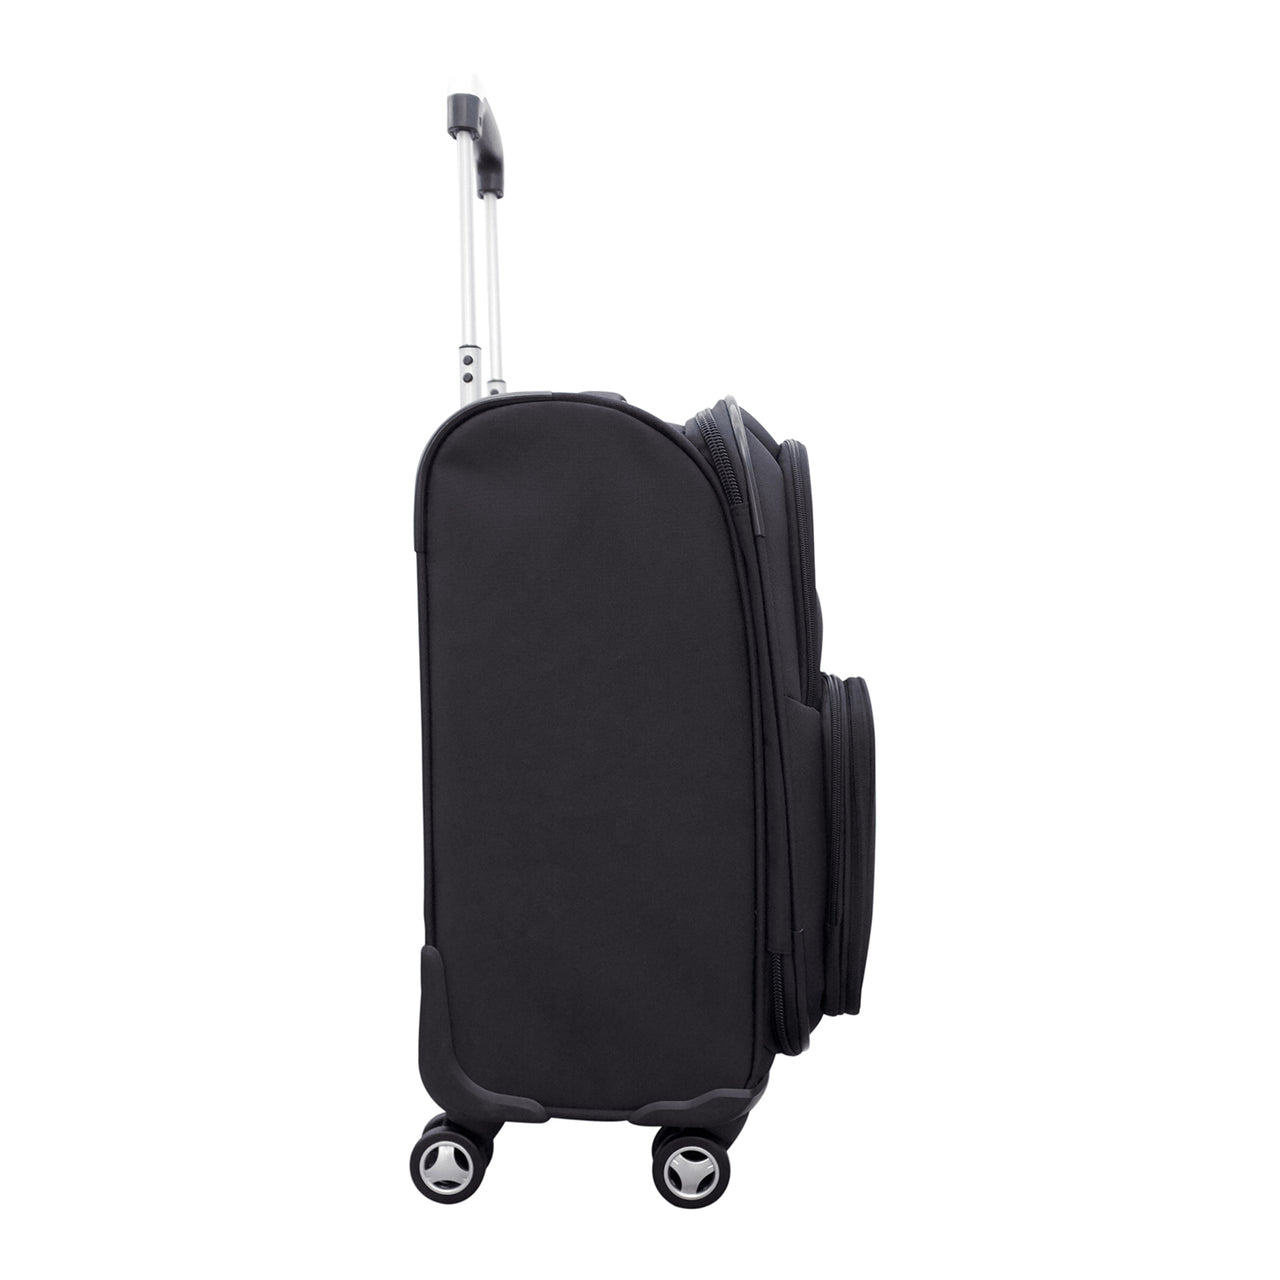 Carolina Panthers 21" Carry-on Spinner Luggage